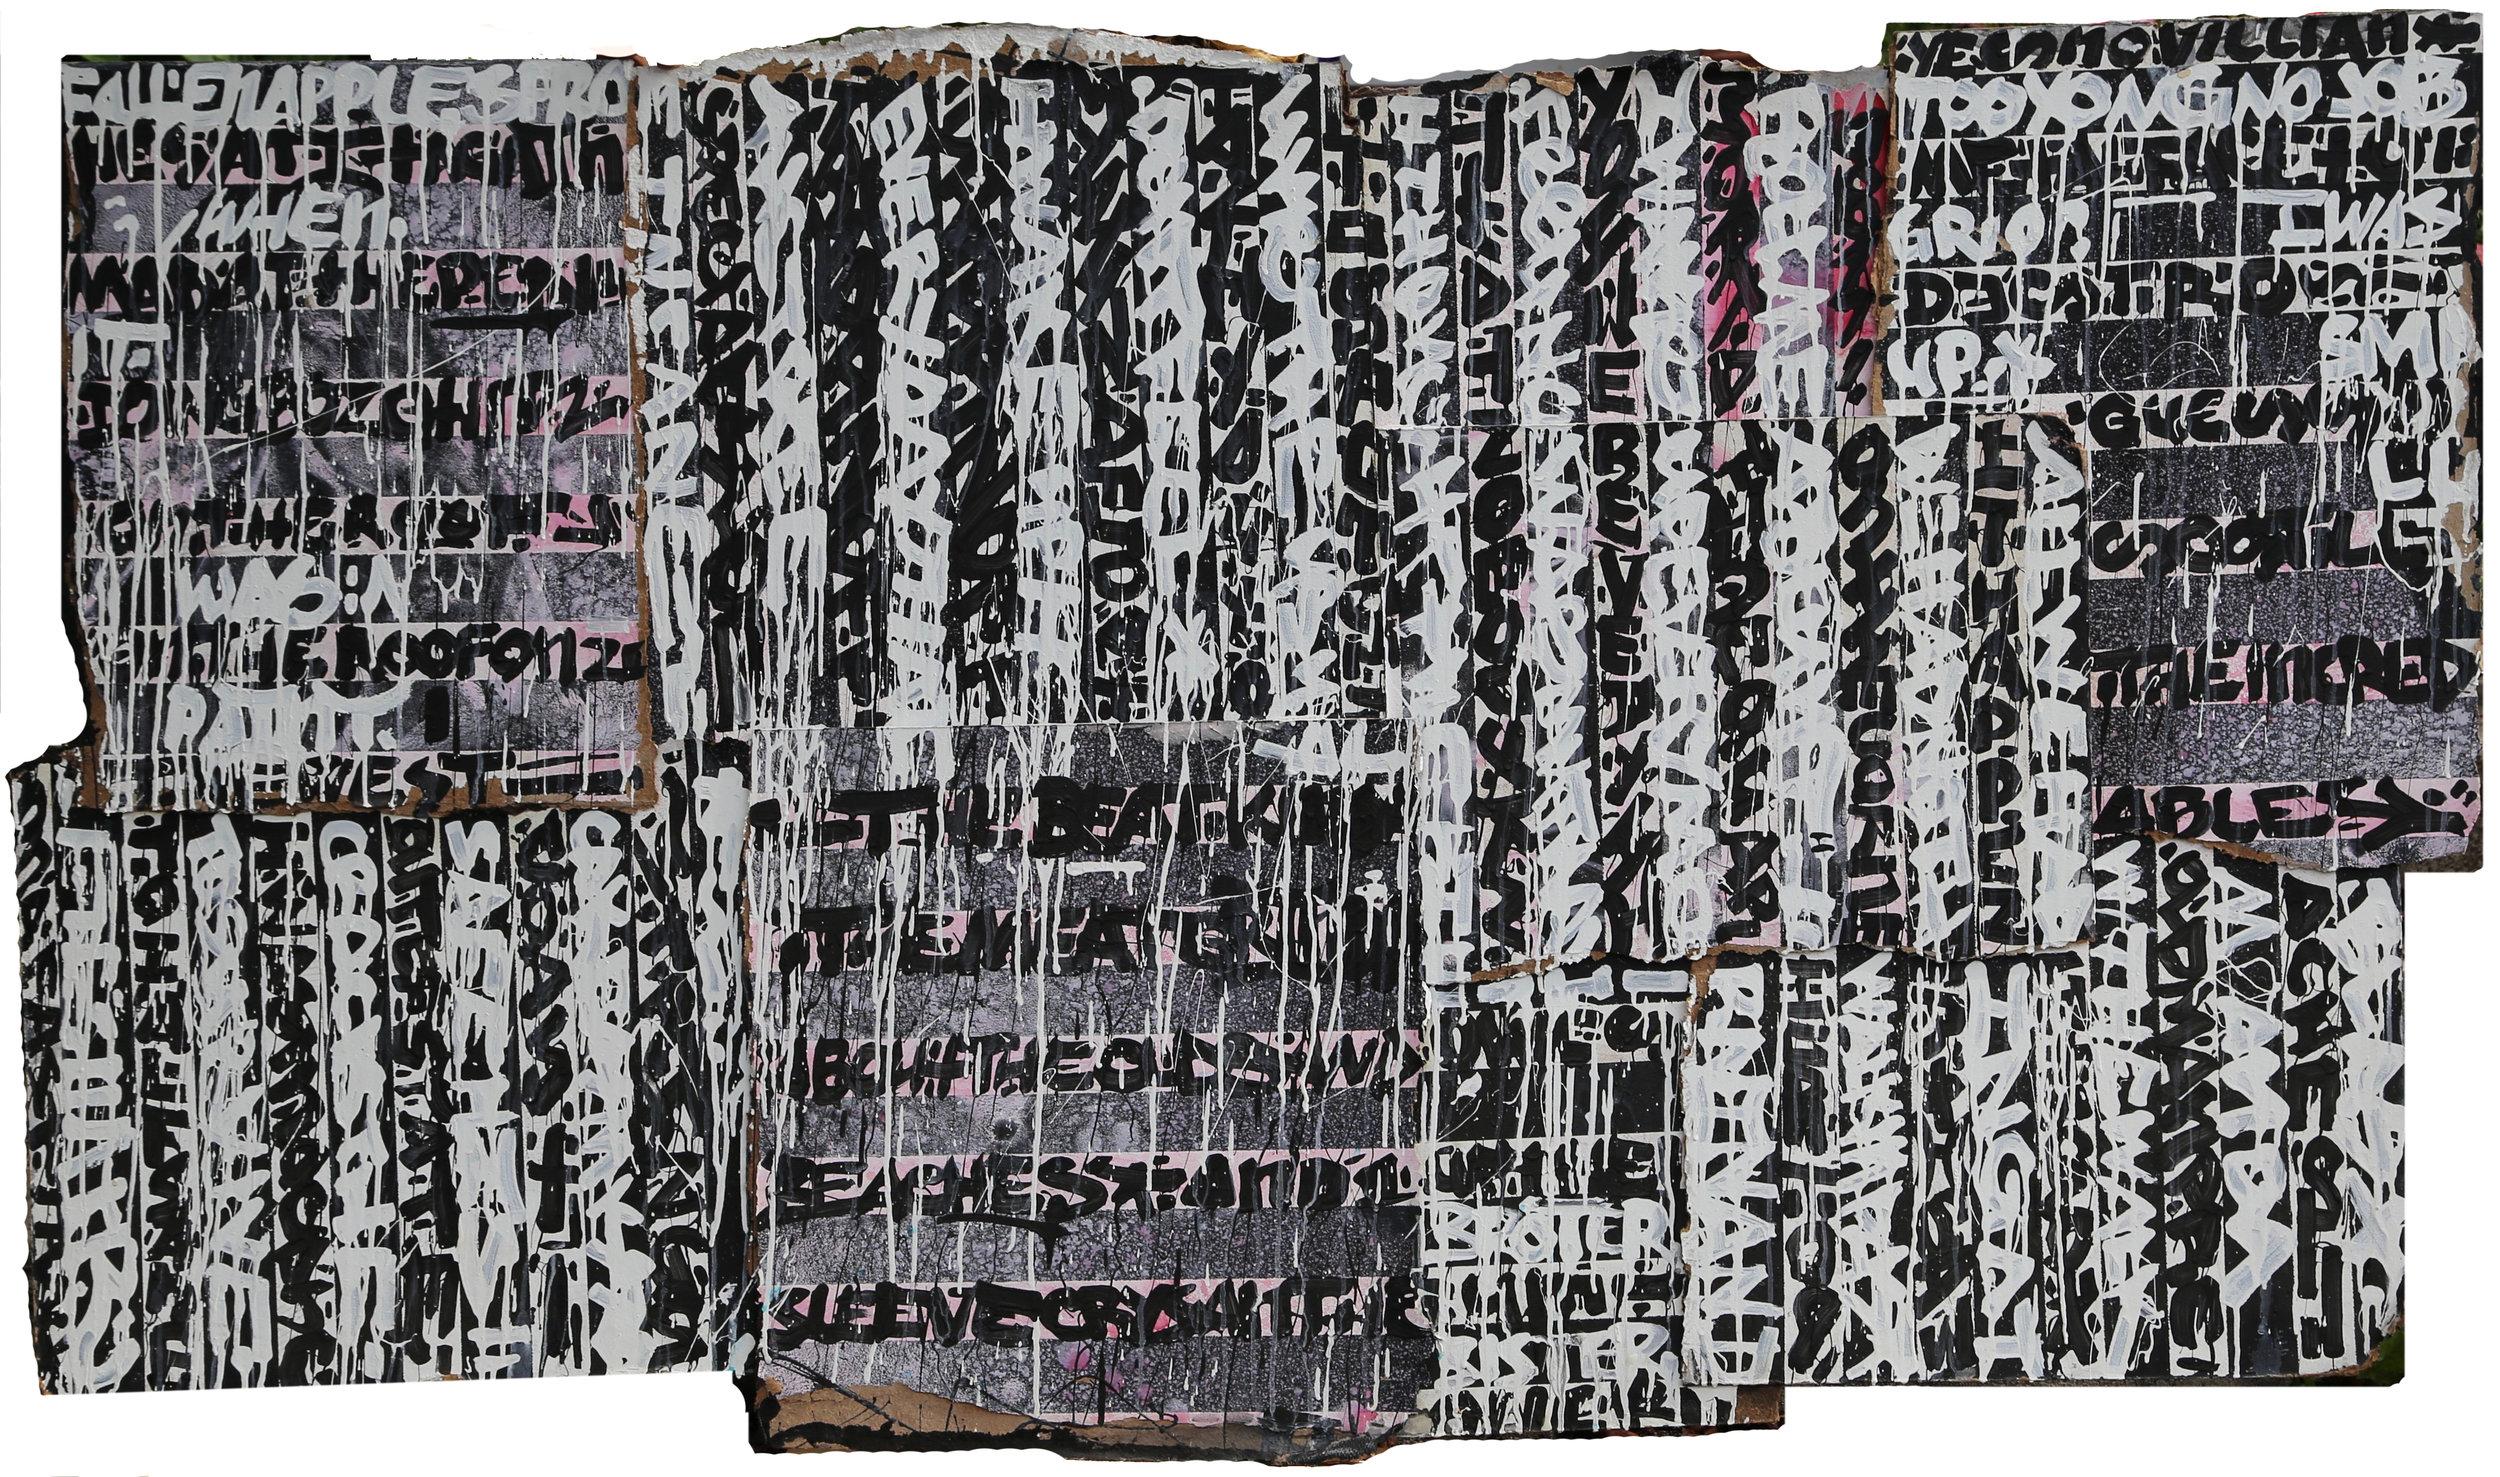 Matthew Spire Abstract Painting - "Doom Lyrics" Graffiti Text-based Collage Painting in Black and White